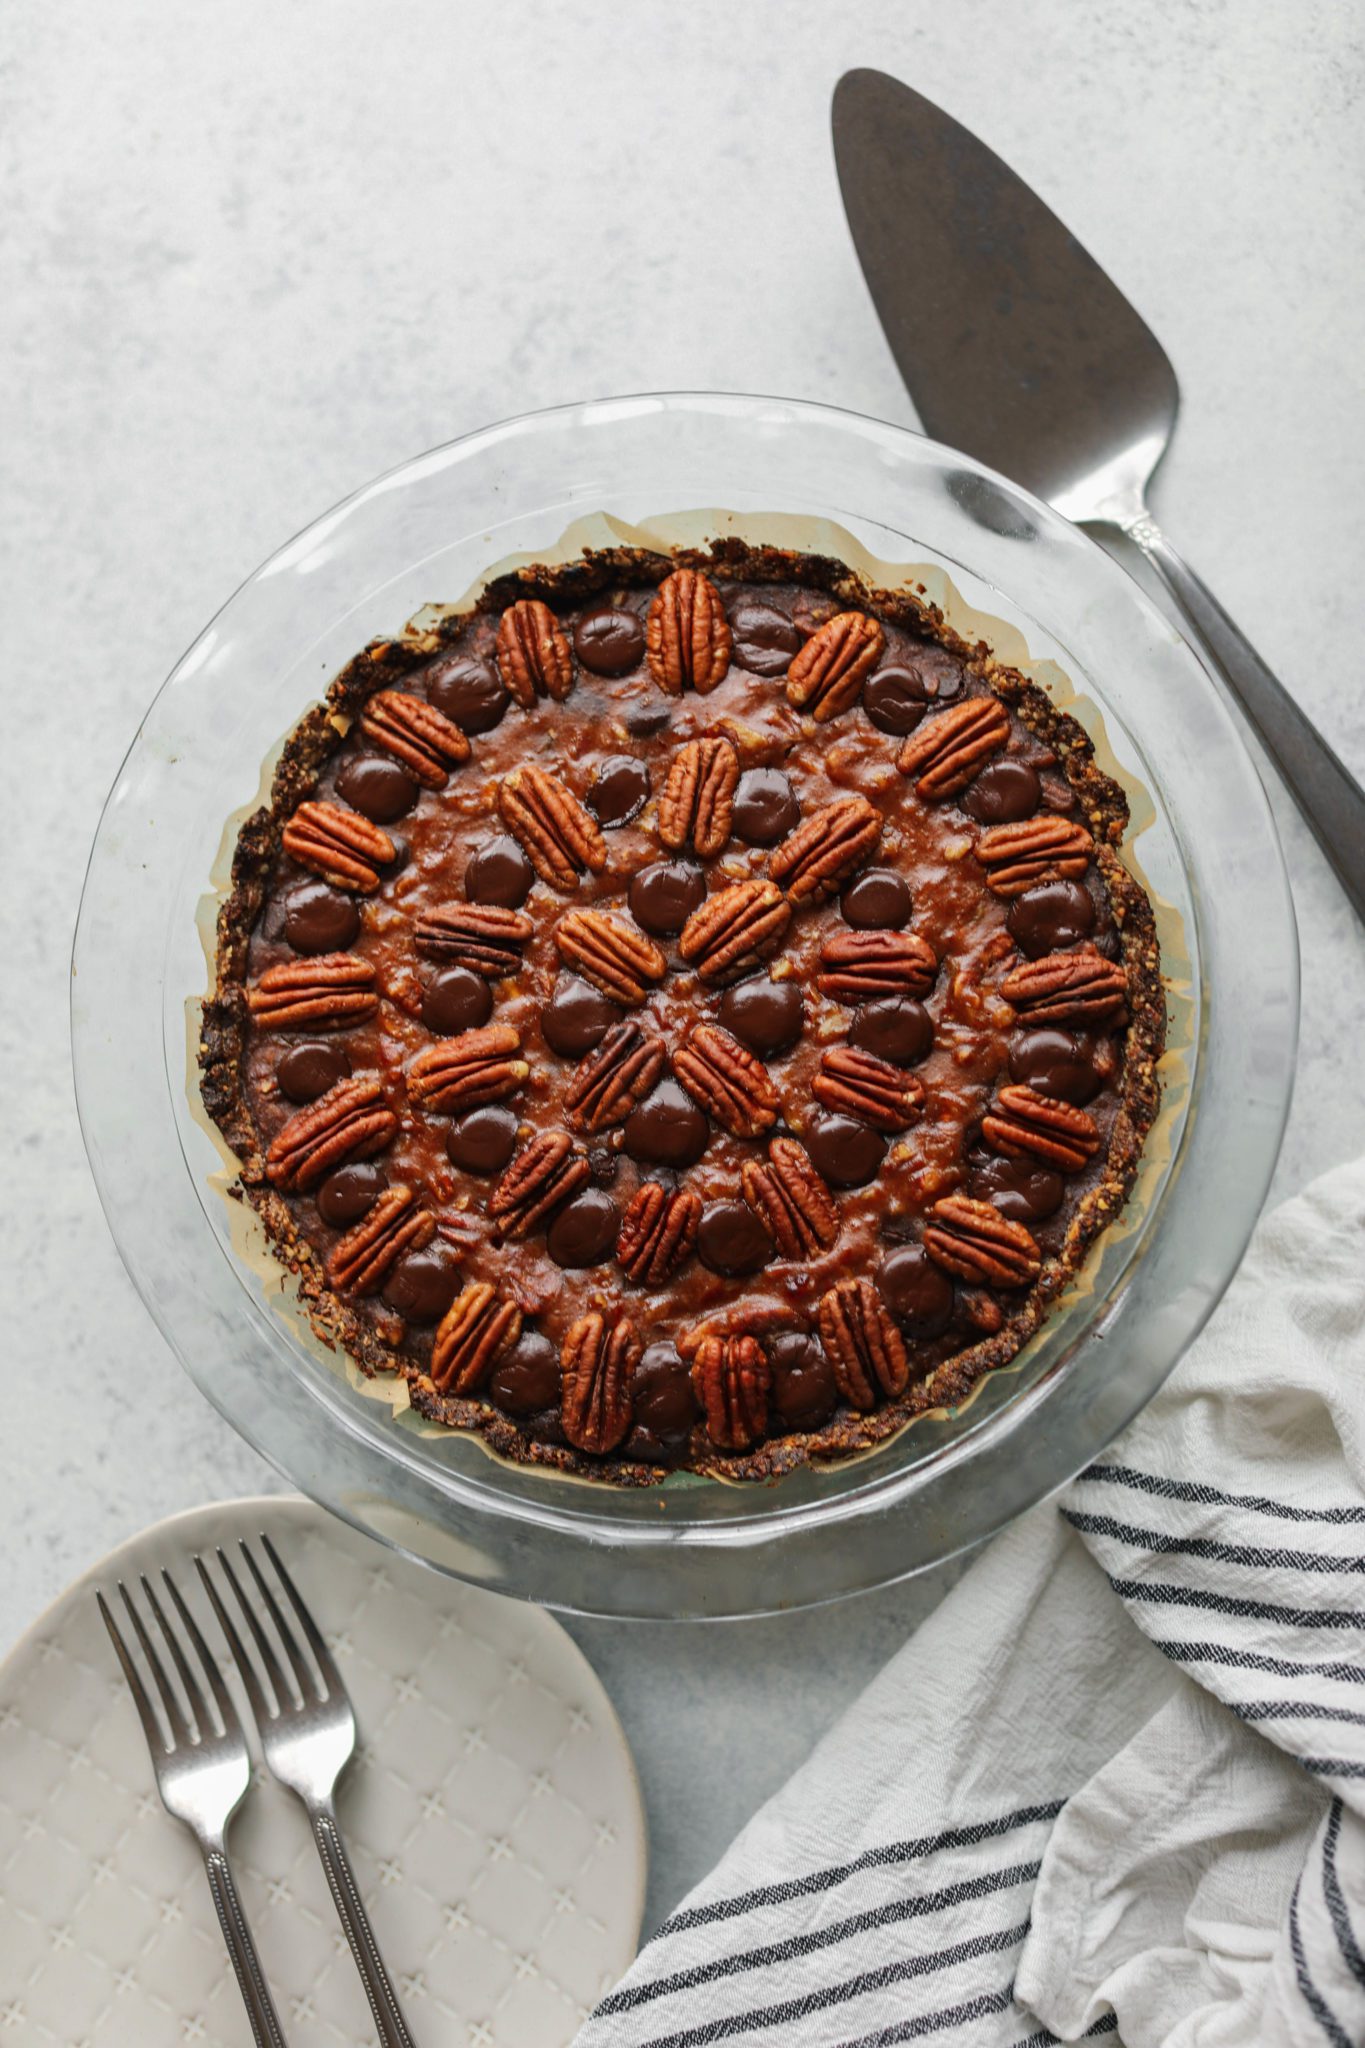 Vegan Dark Chocolate Pecan Pie baked in pie pie with pie server and plates and forks by Flora & vino